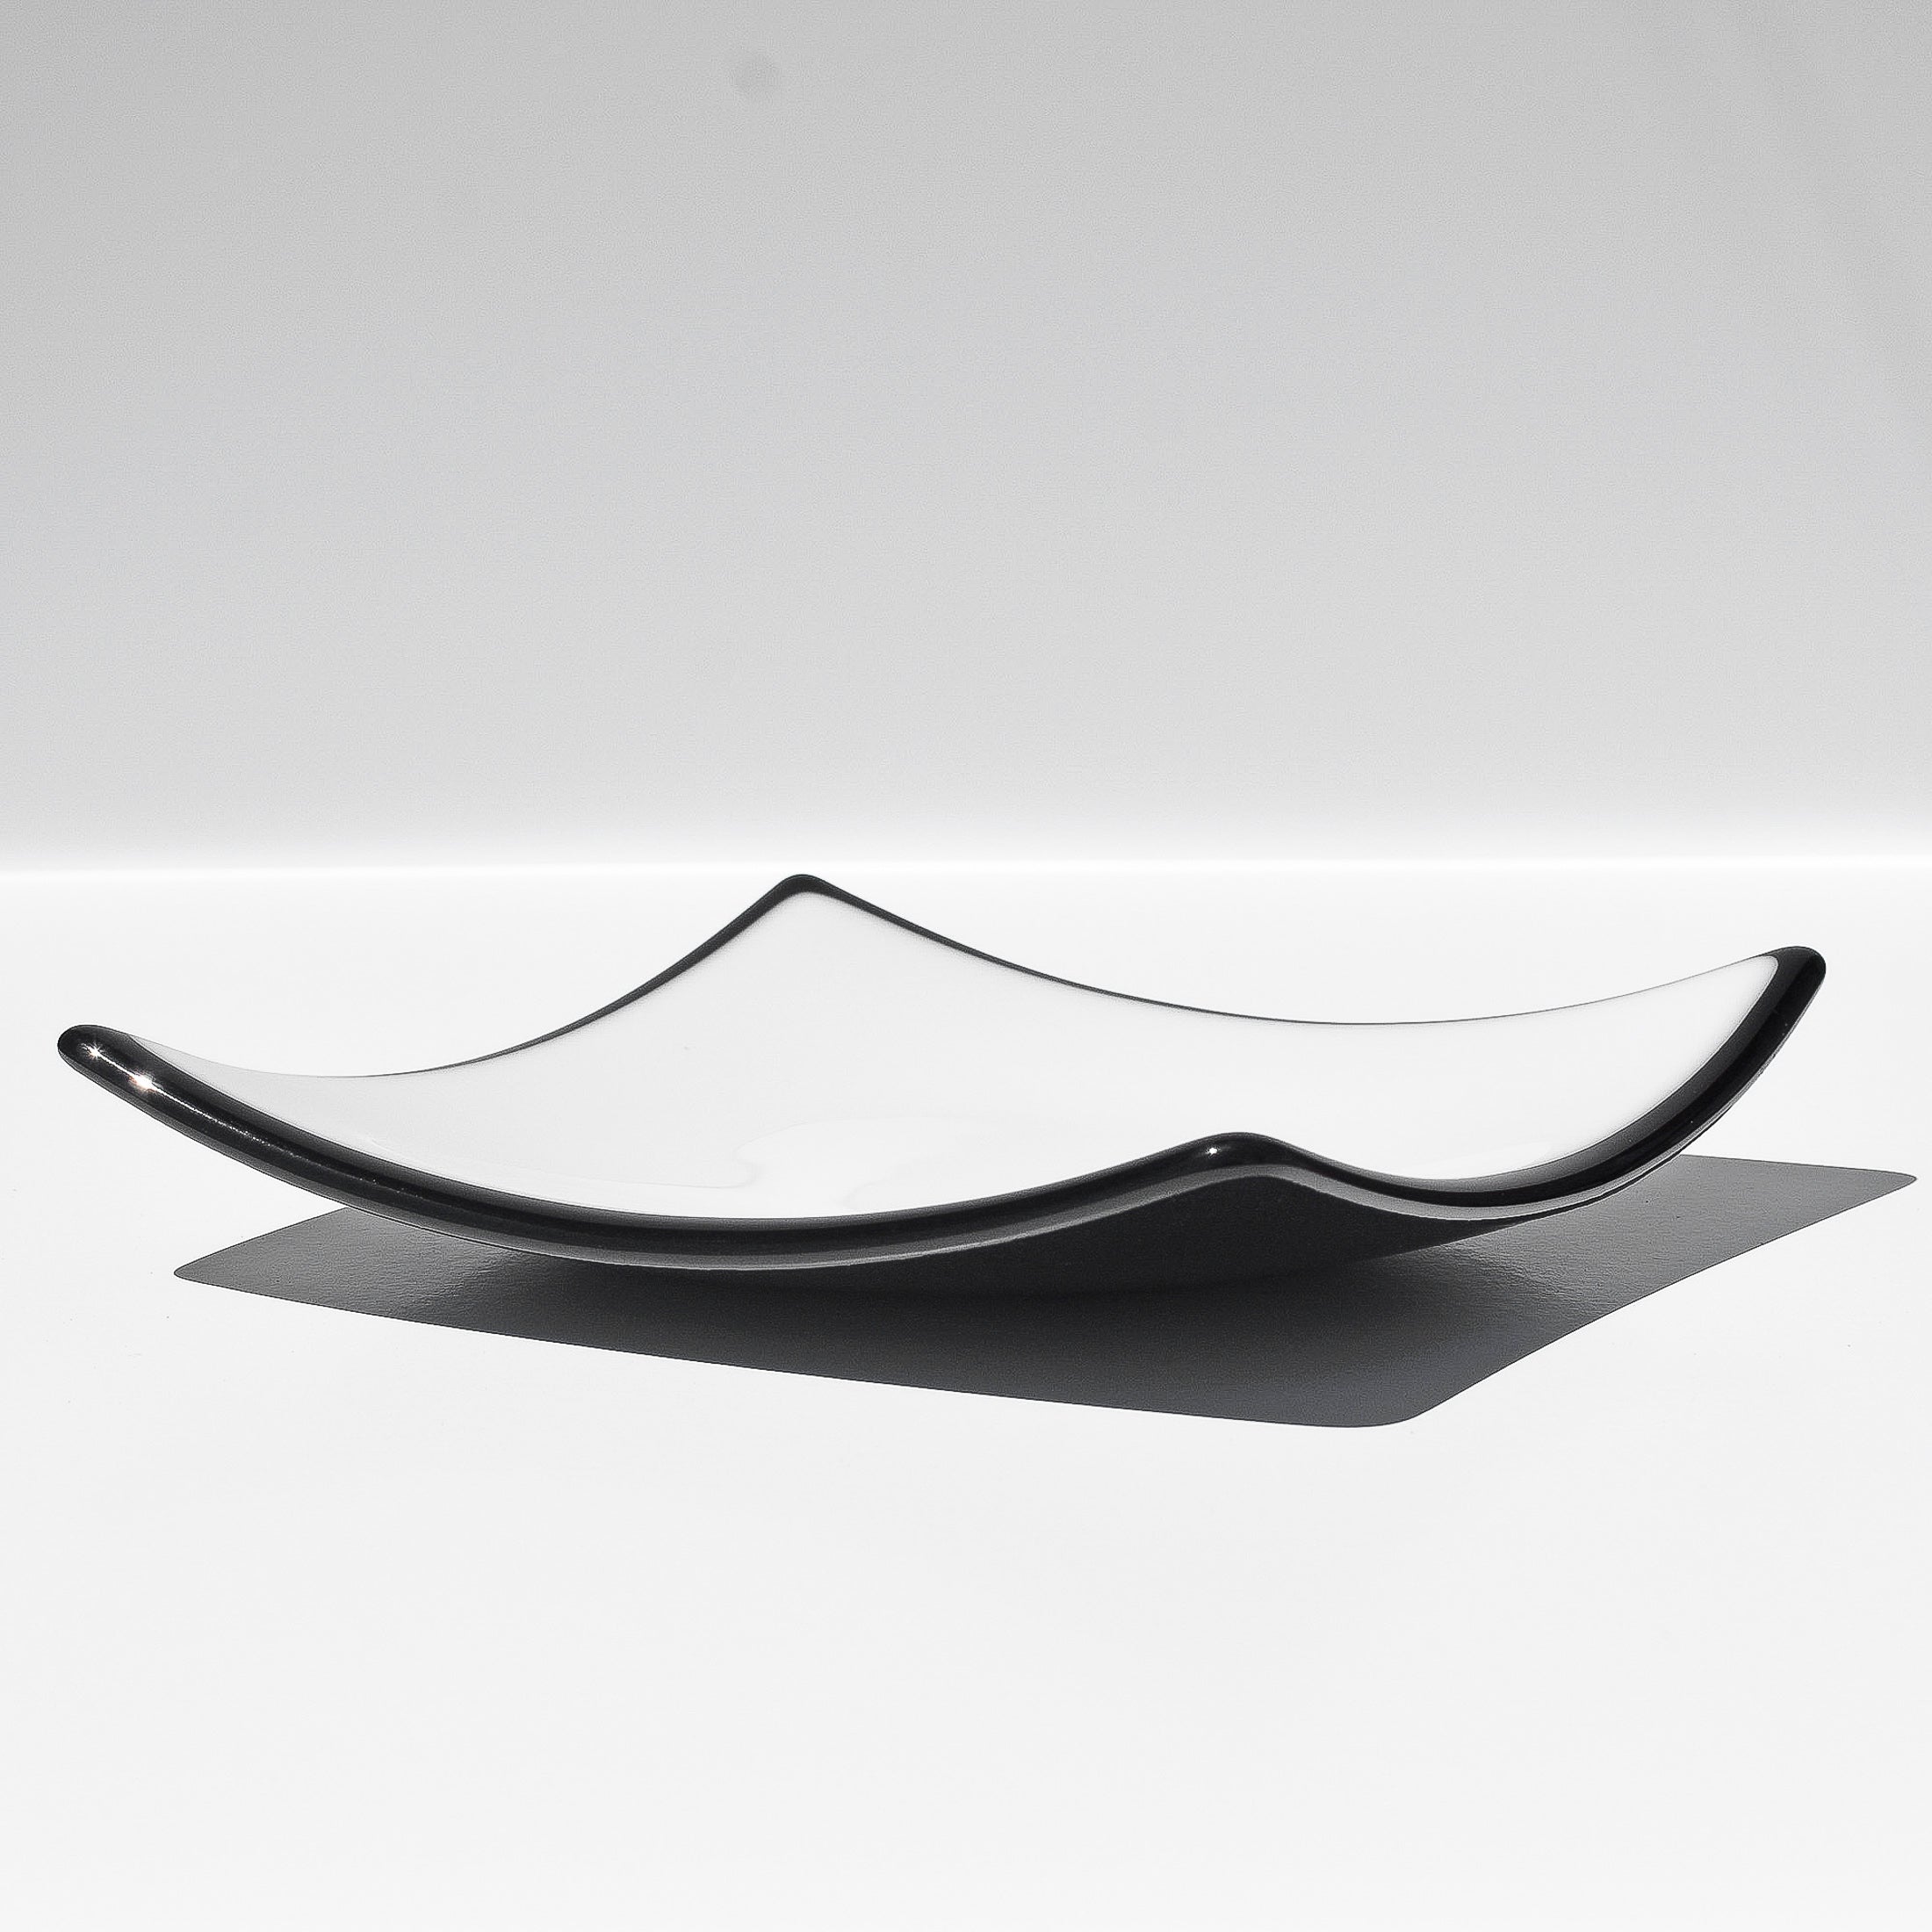 White square dish with black trim on white background viewed from the side